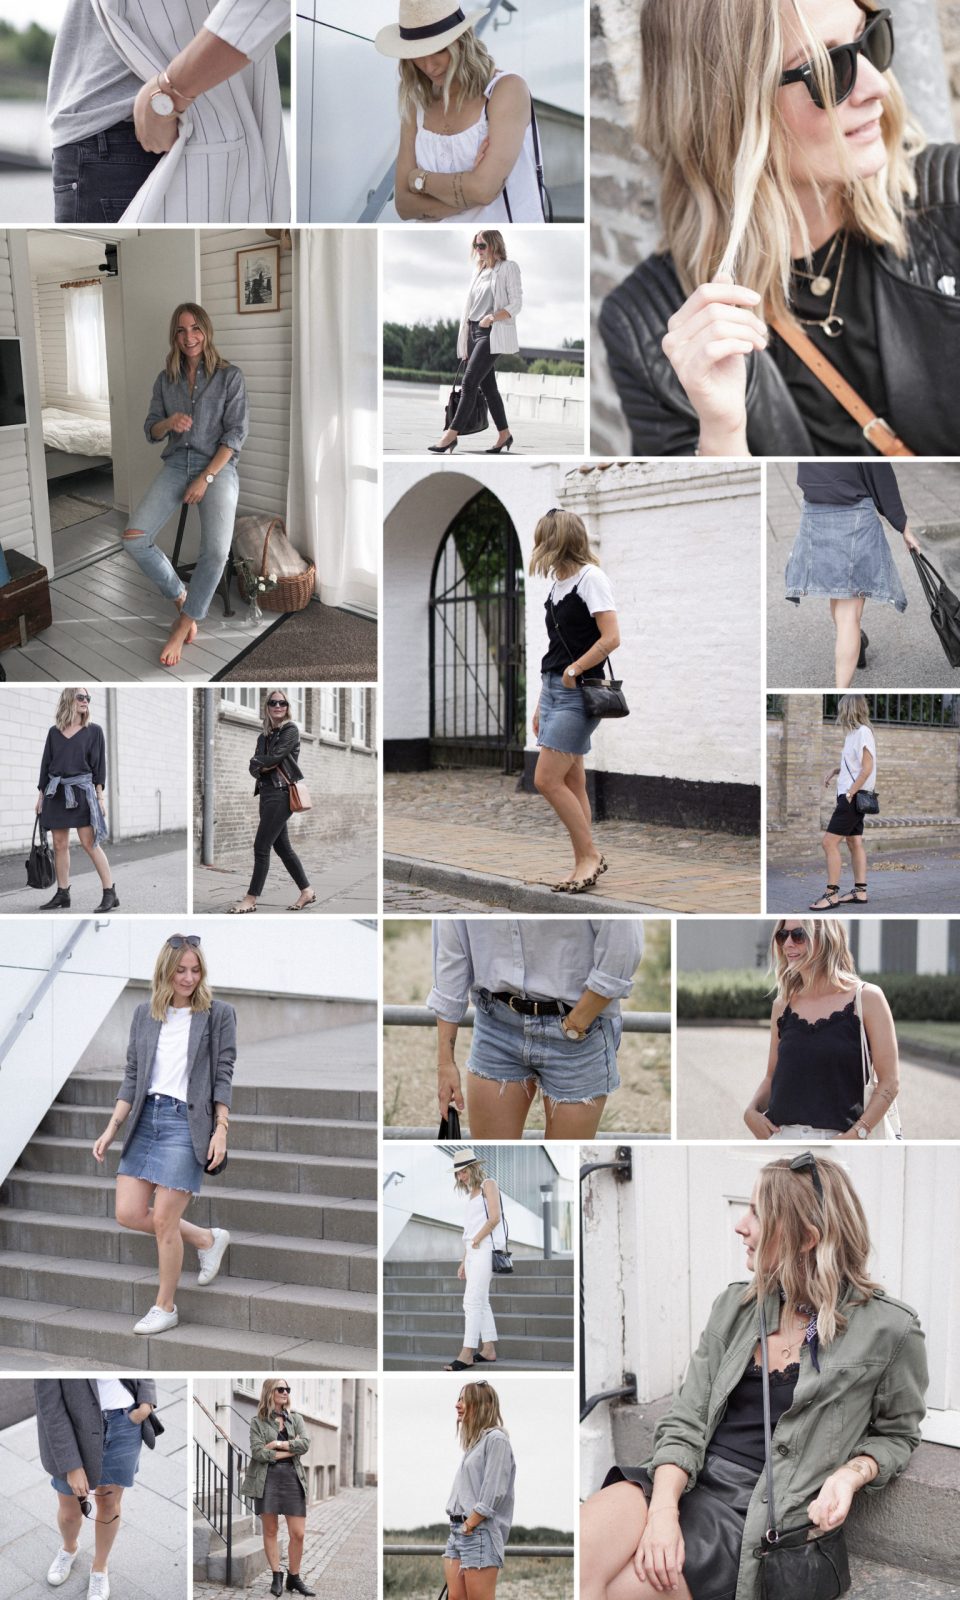 My favourite wardrobe staples and outfits in 2018.